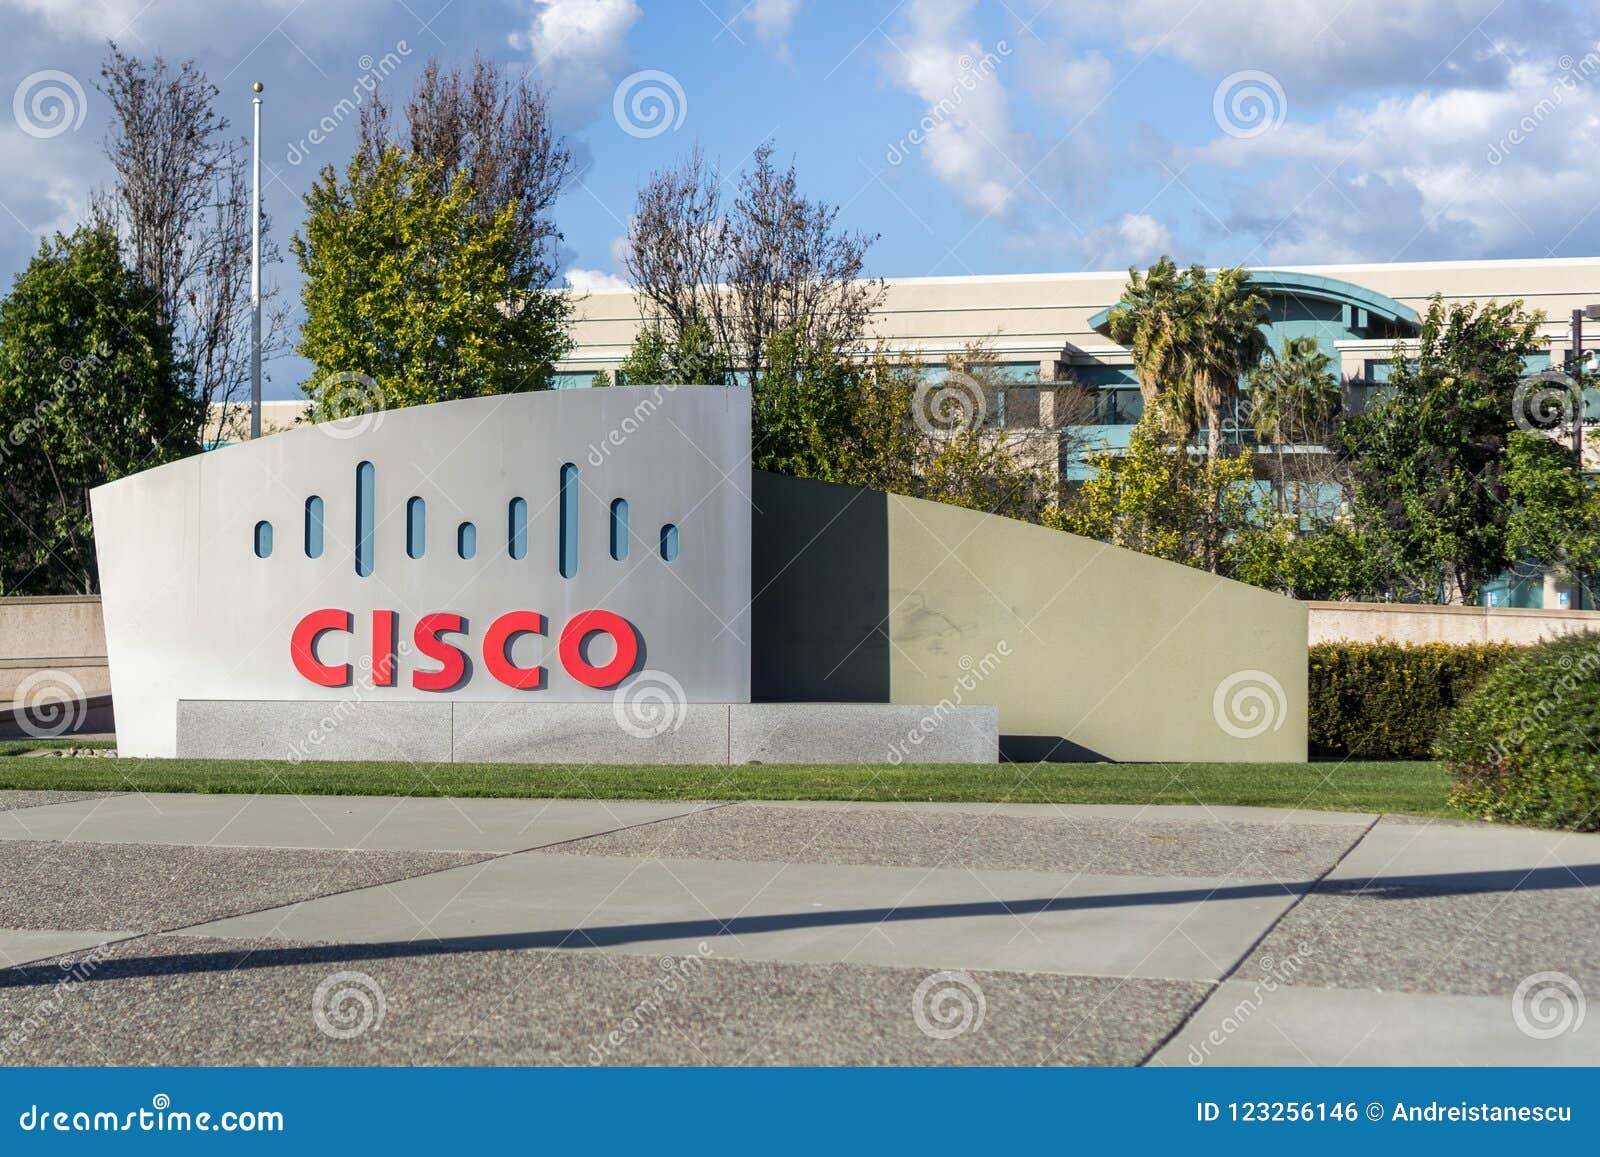 S Headquarters In Silicon Valley Stock Photo - Download Image